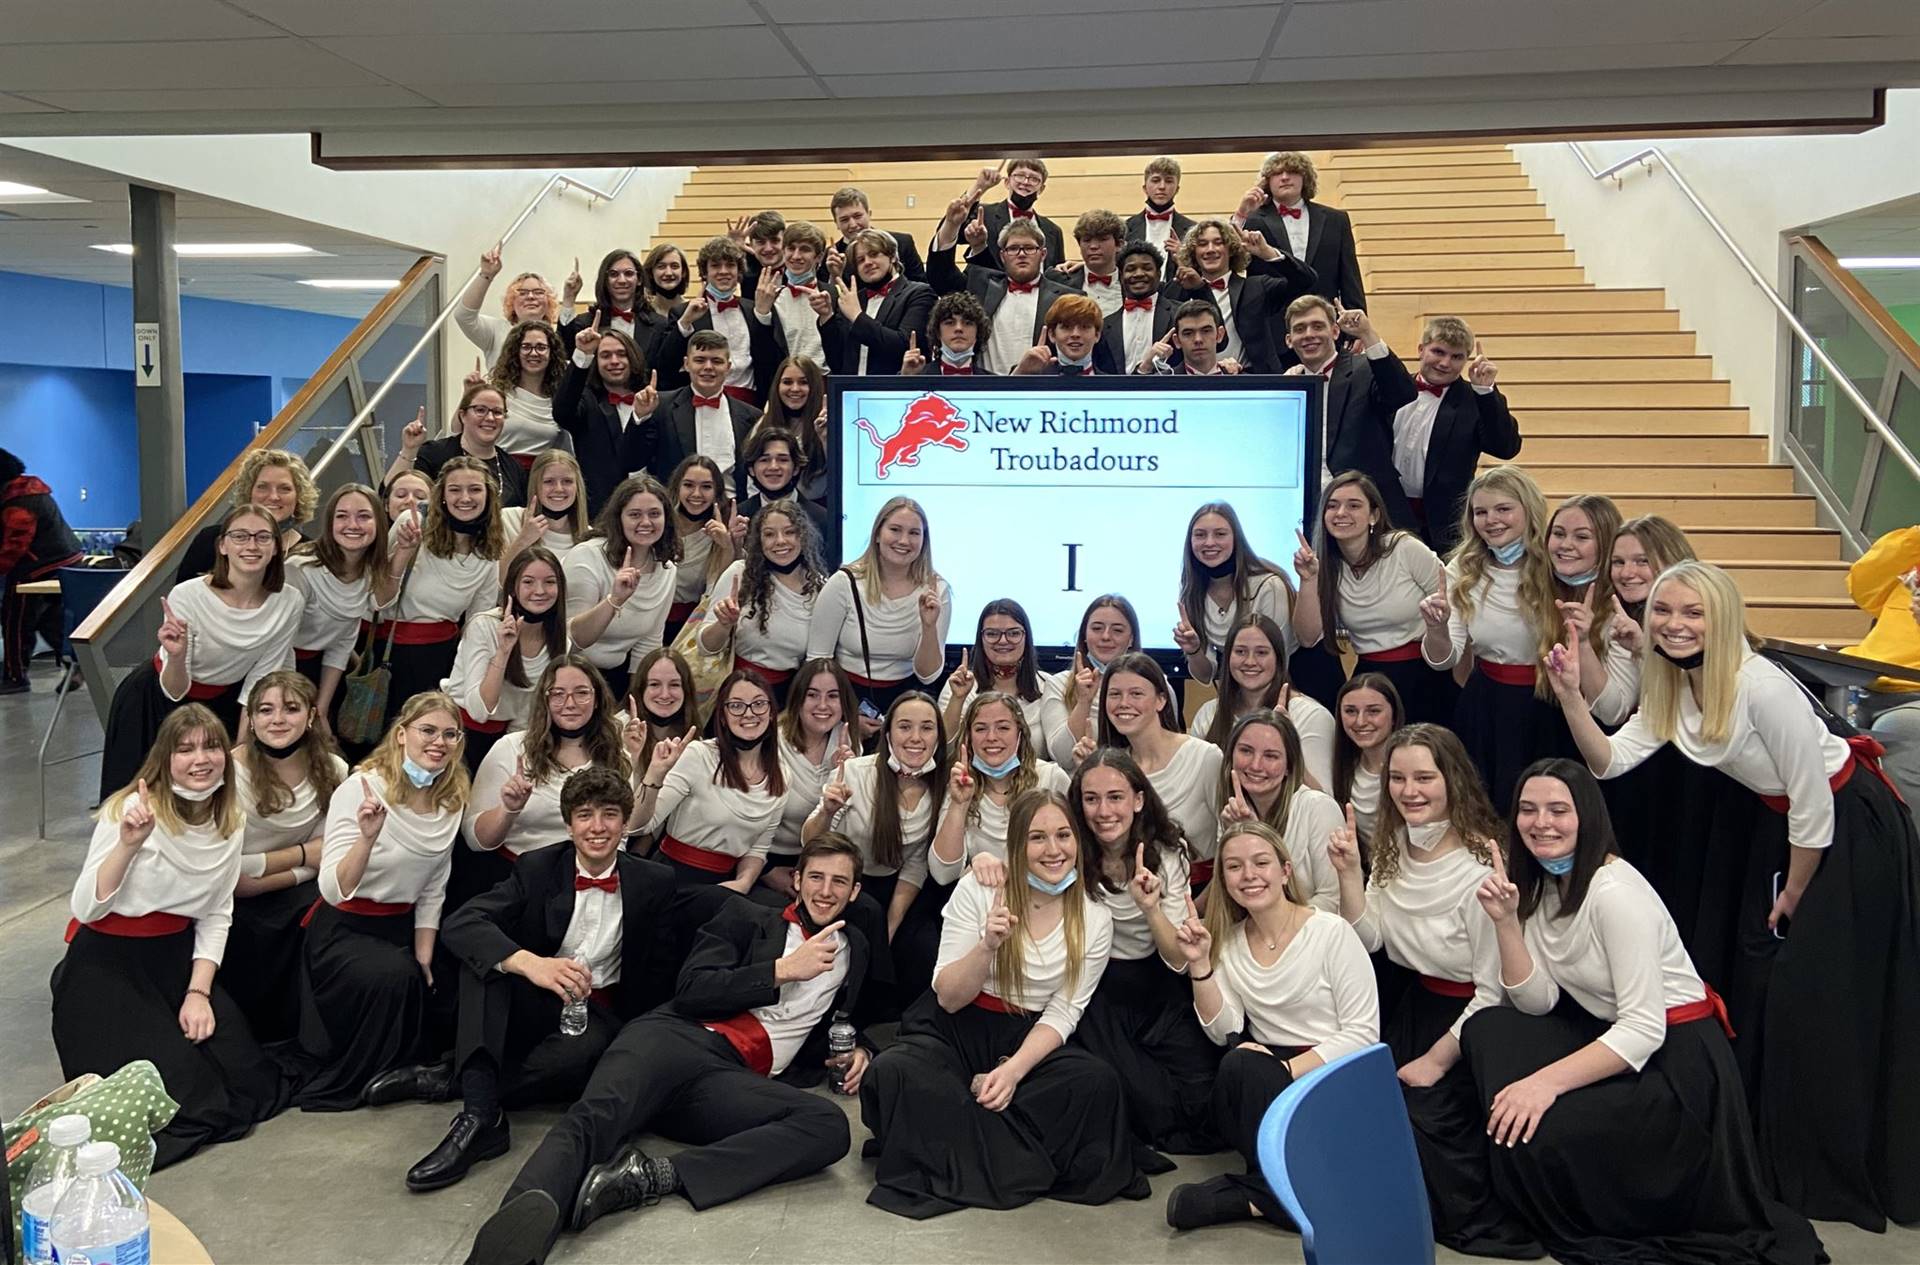 NRHS Troubadours Earn Superior Rating - all 1s